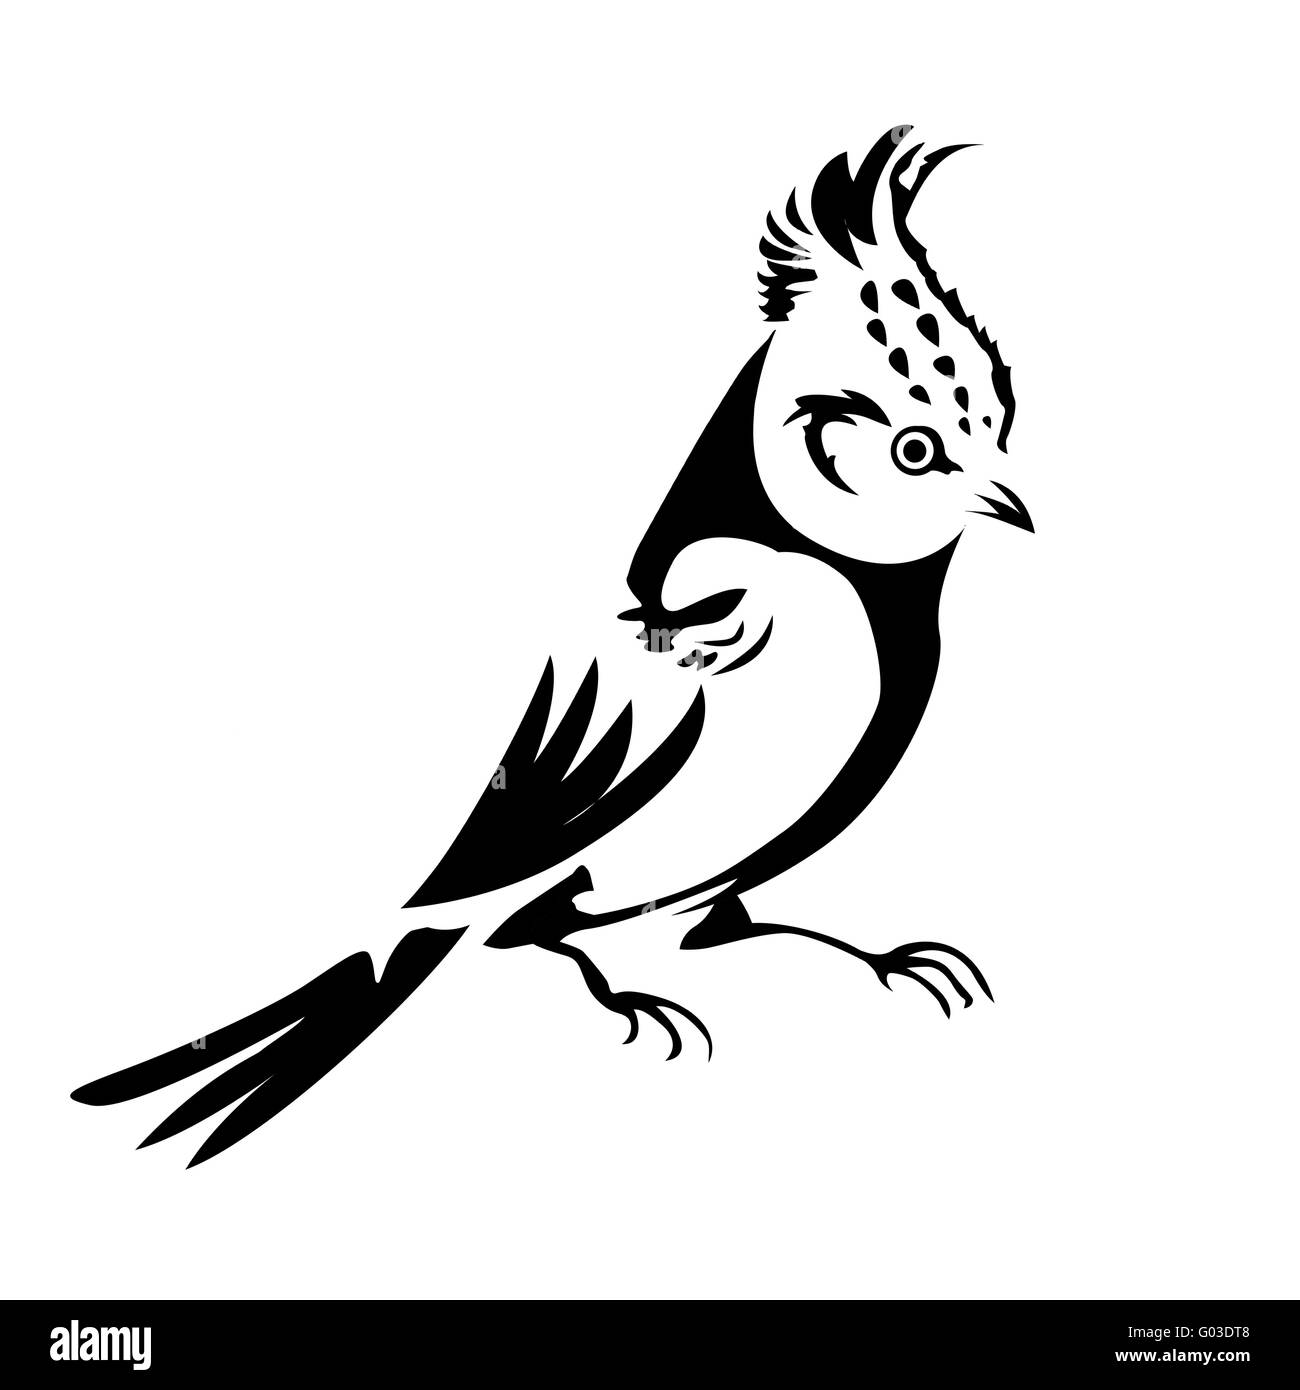 vector silhouette of the small bird on white background Stock Photo